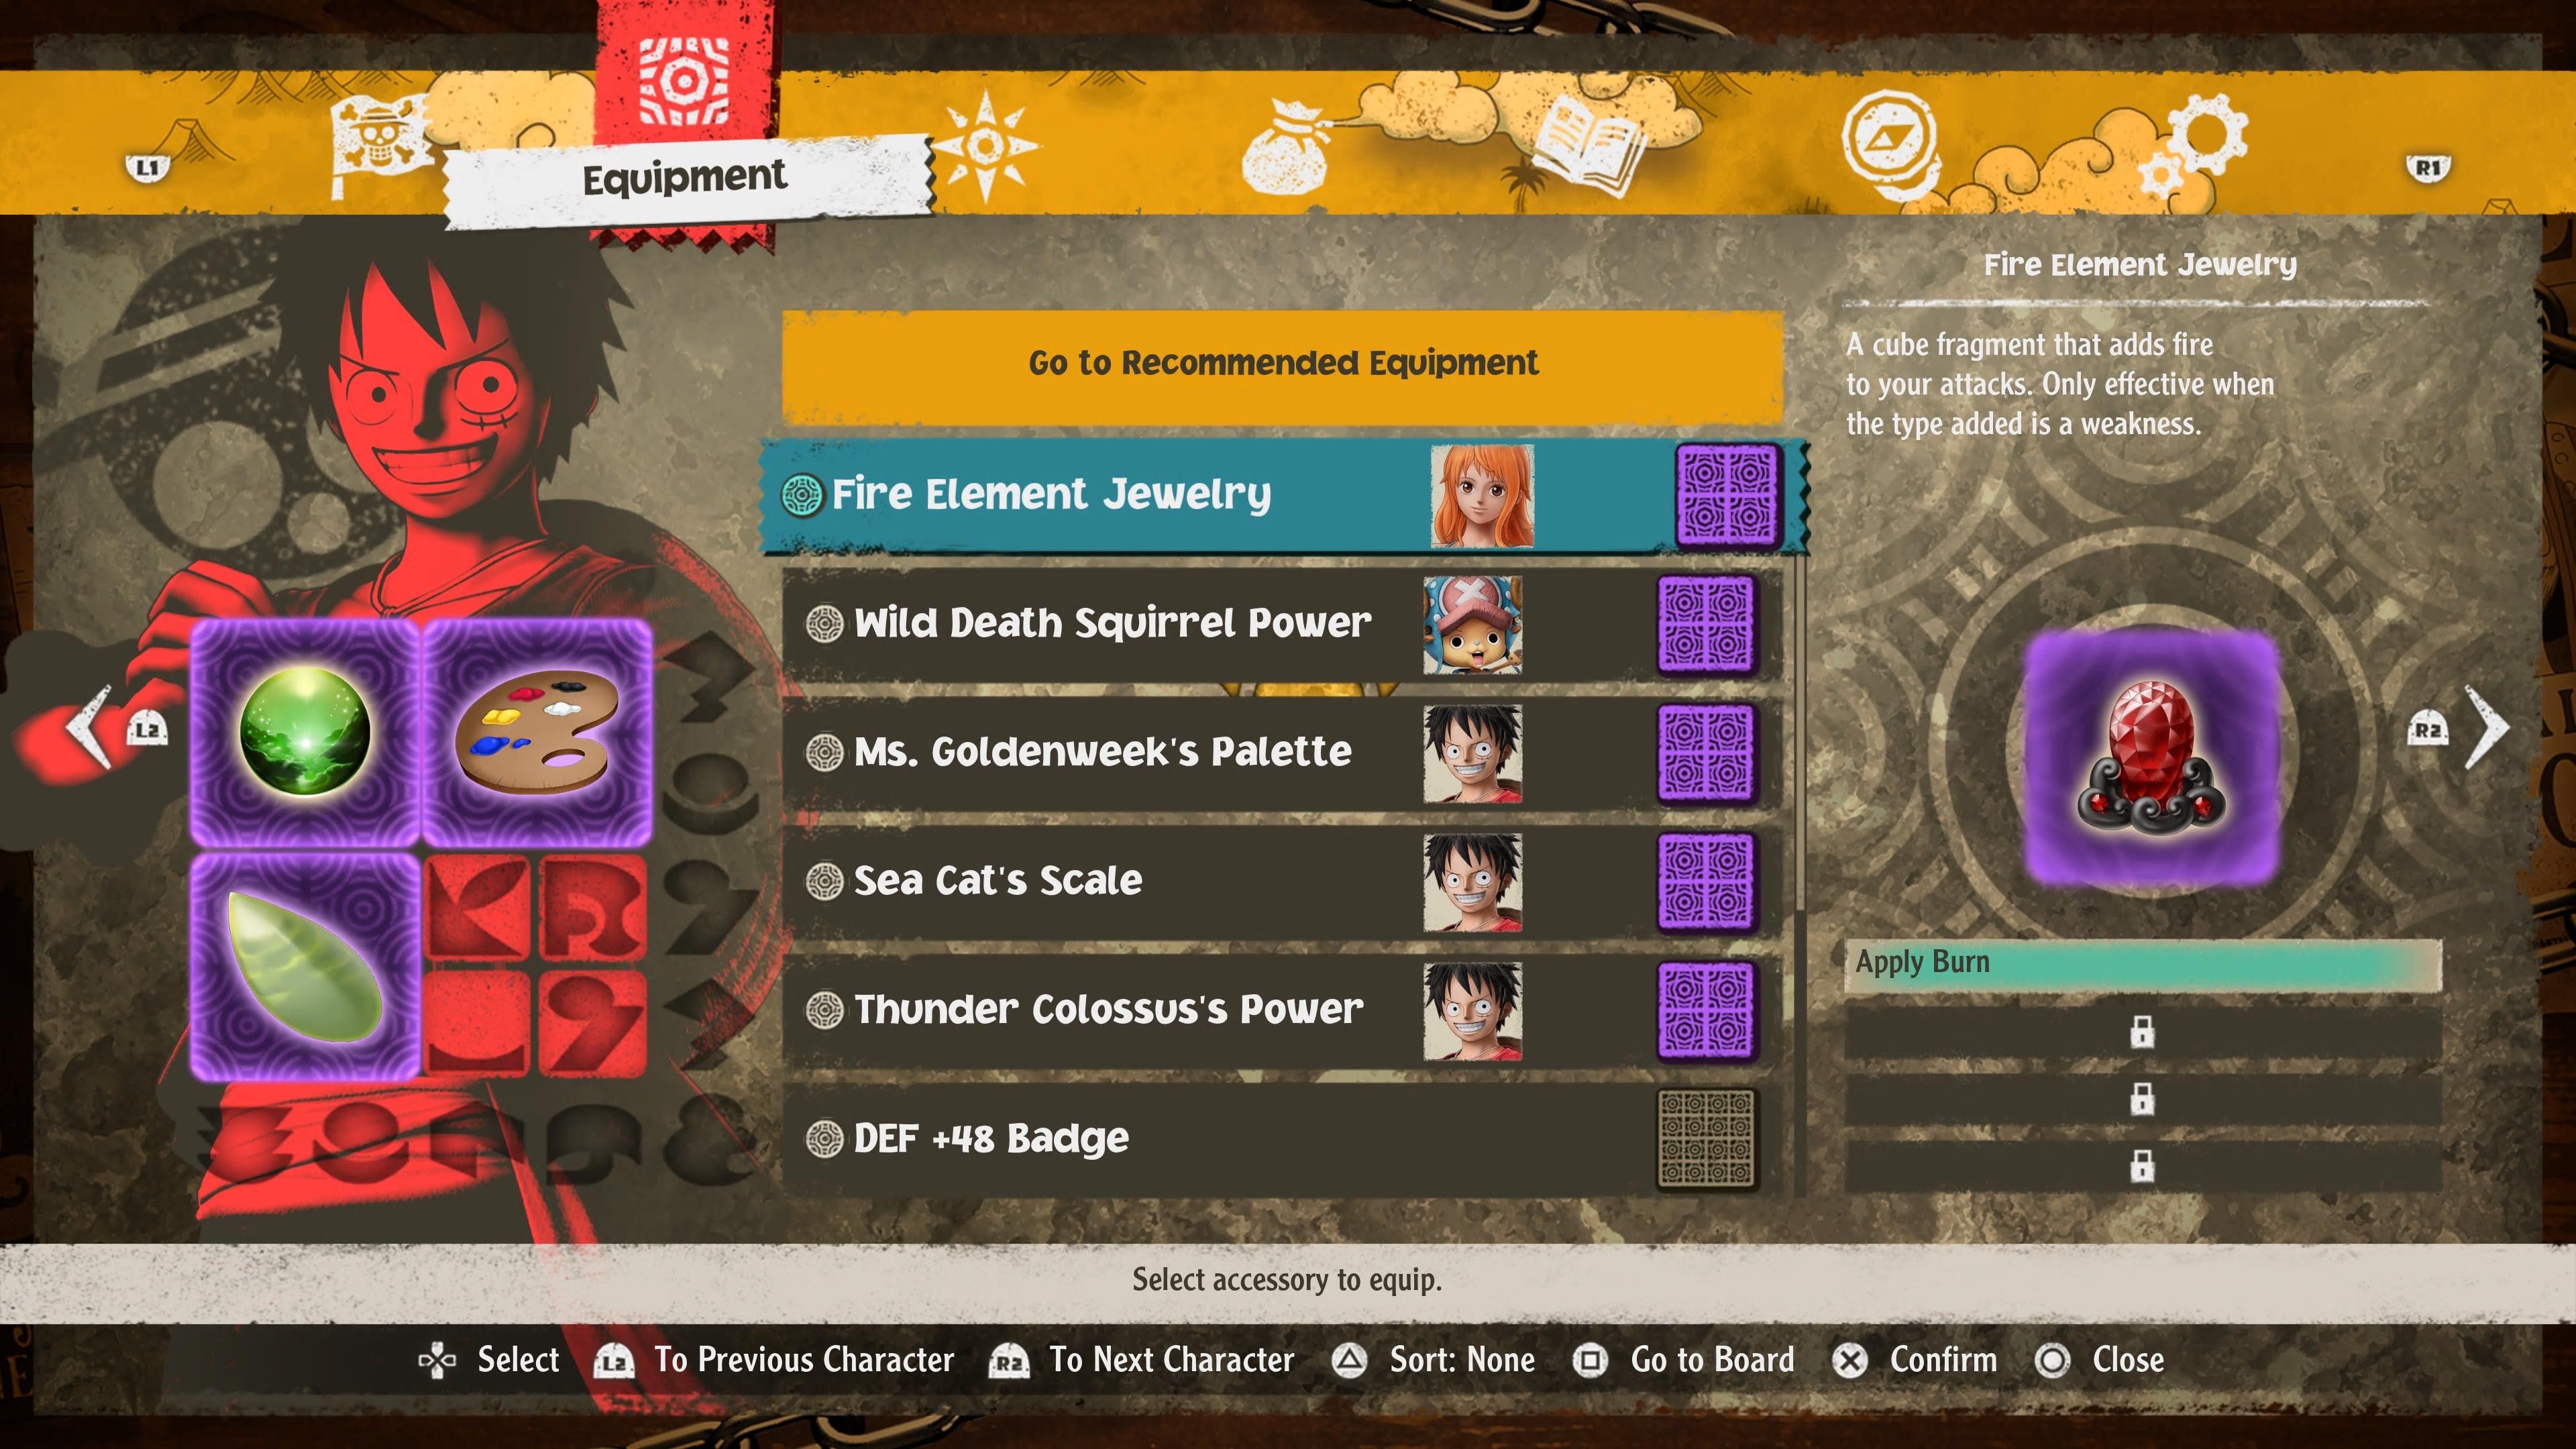 One Piece Odyssey accessory screen showing equipment to use